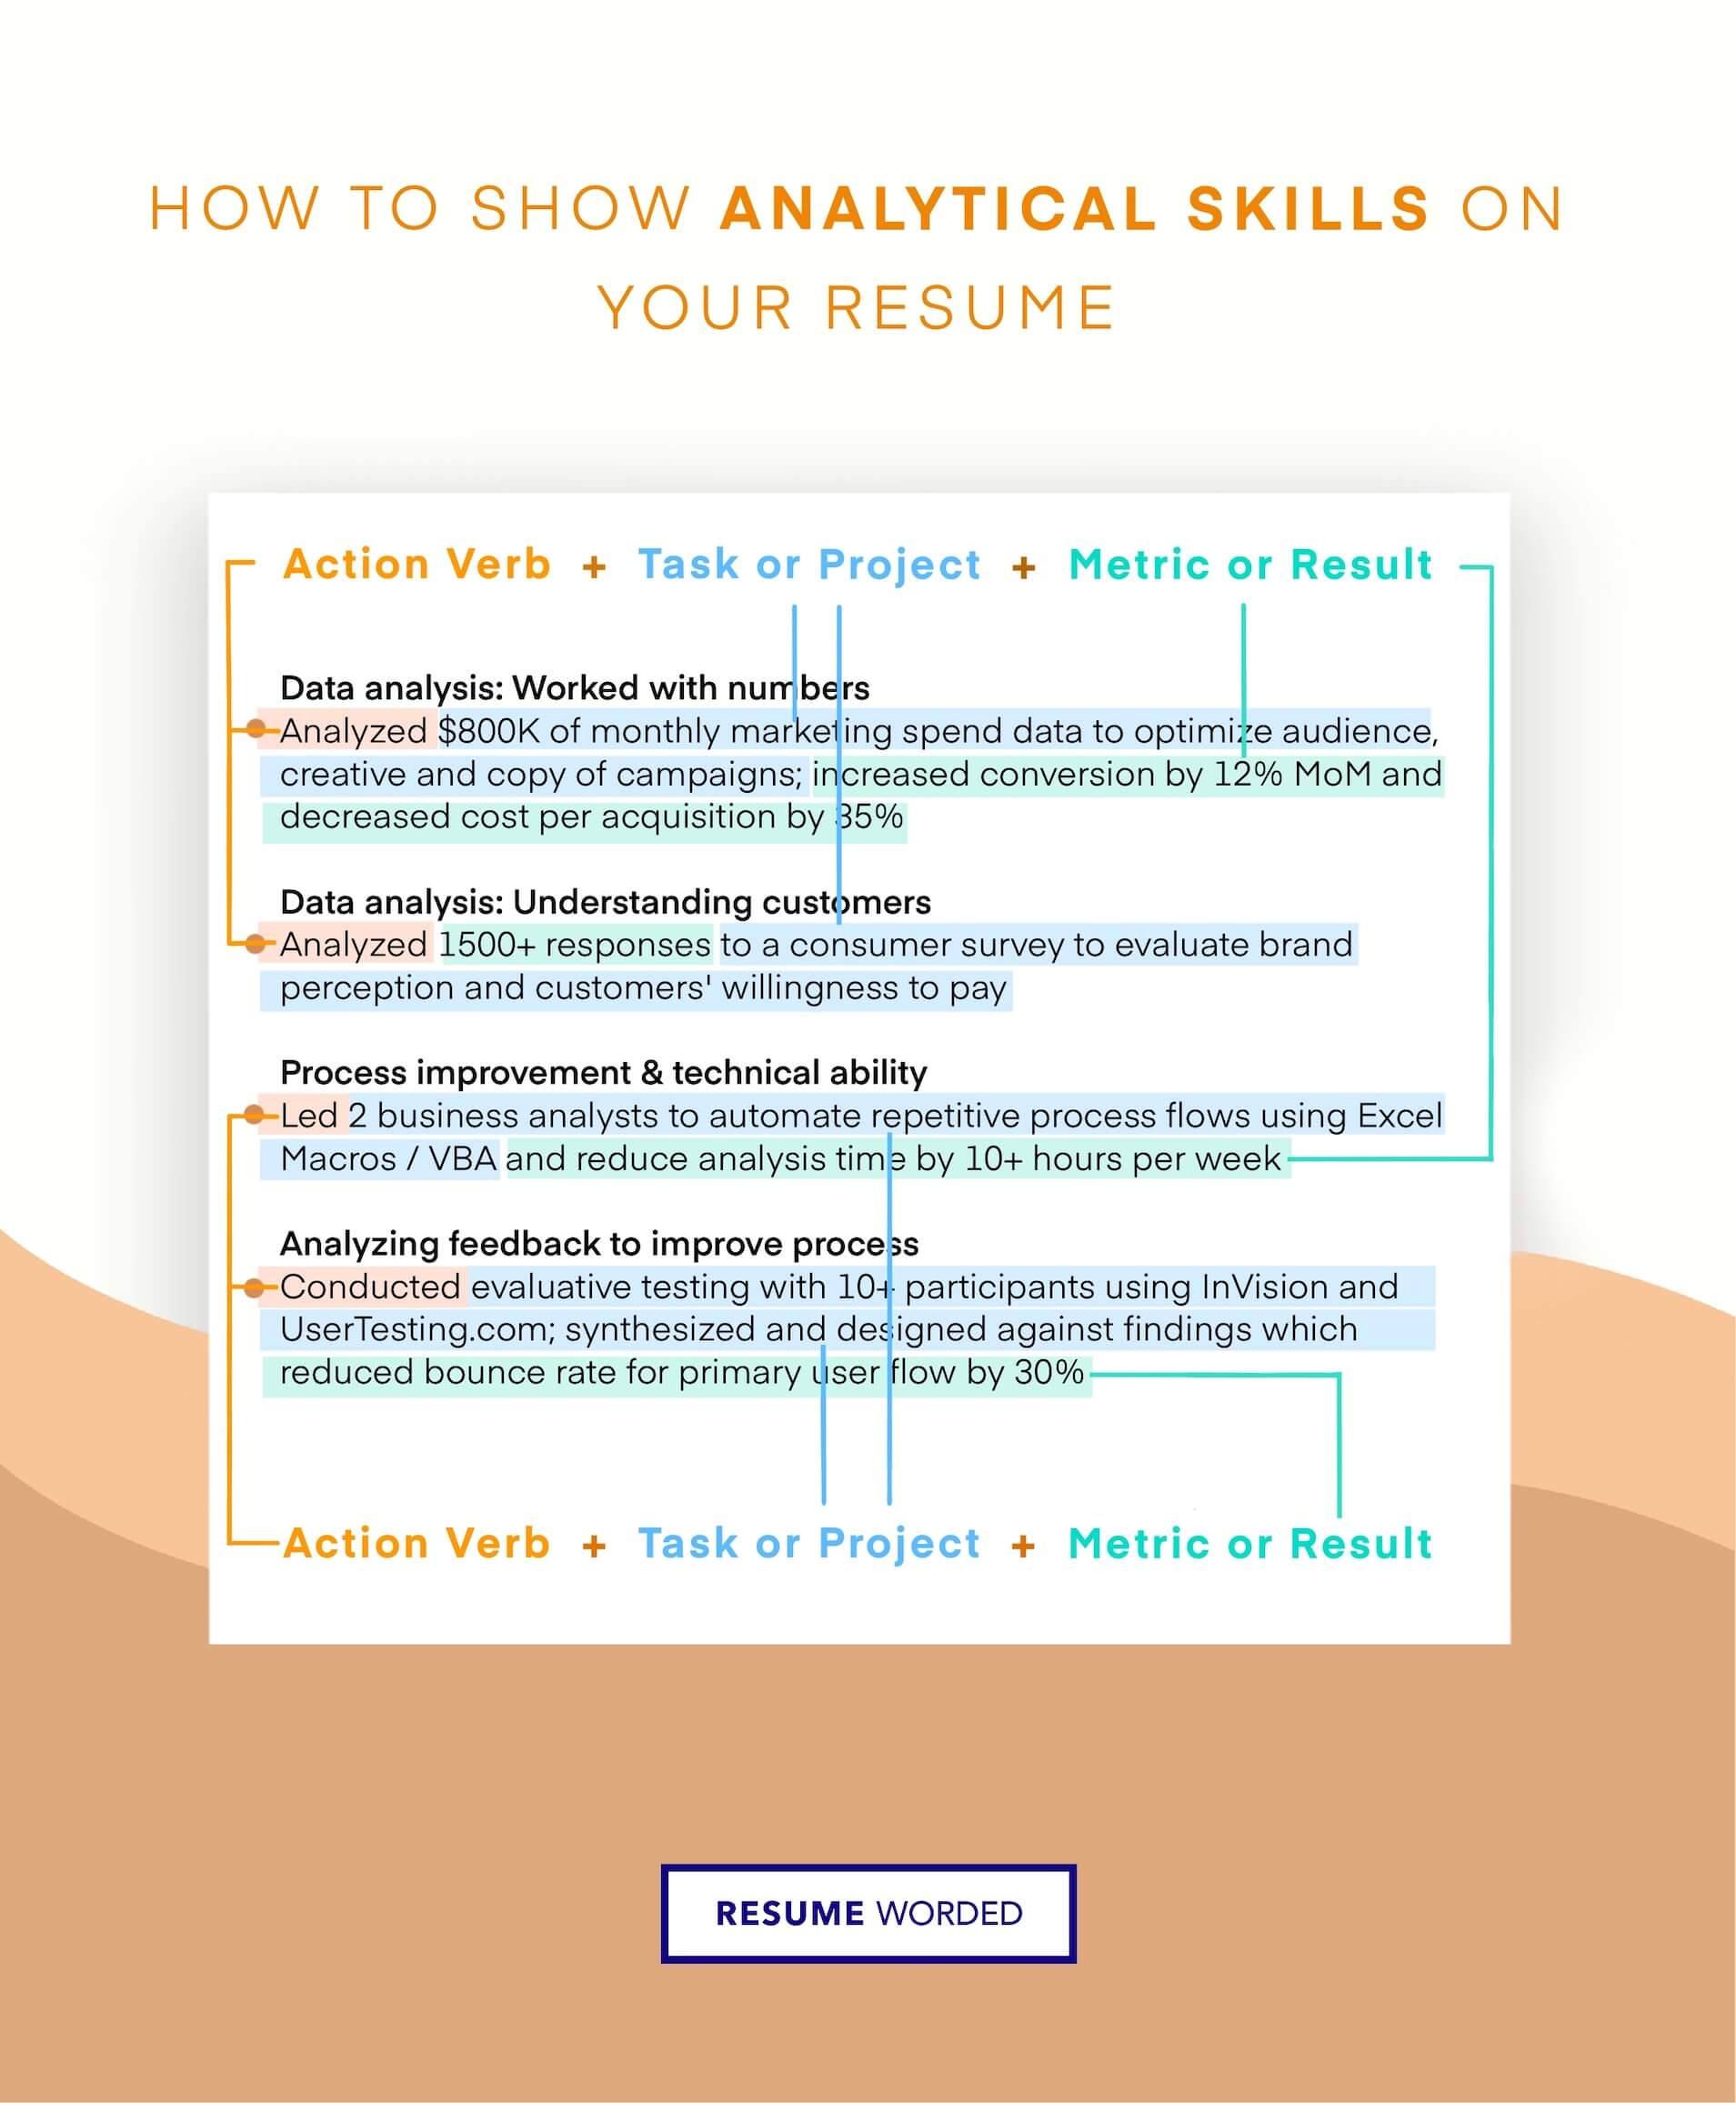 An infographic showing ways to highlight analytical skills through your bullet points